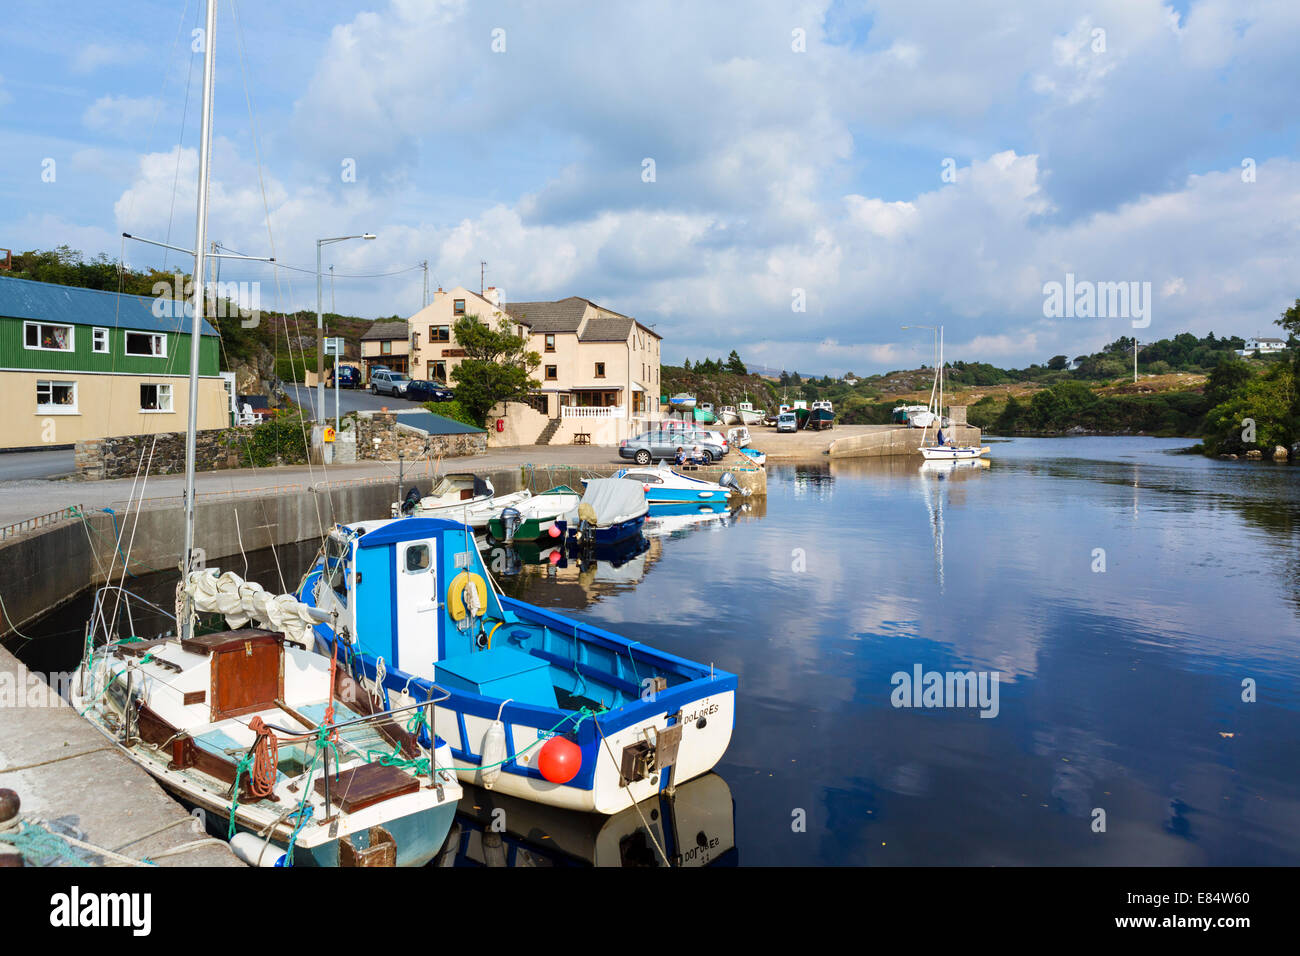 The small picturesque harbour in Bunbeg with Bunbeg House hotel behind, Gweedore, County Donegal, Republic of Ireland Stock Photo